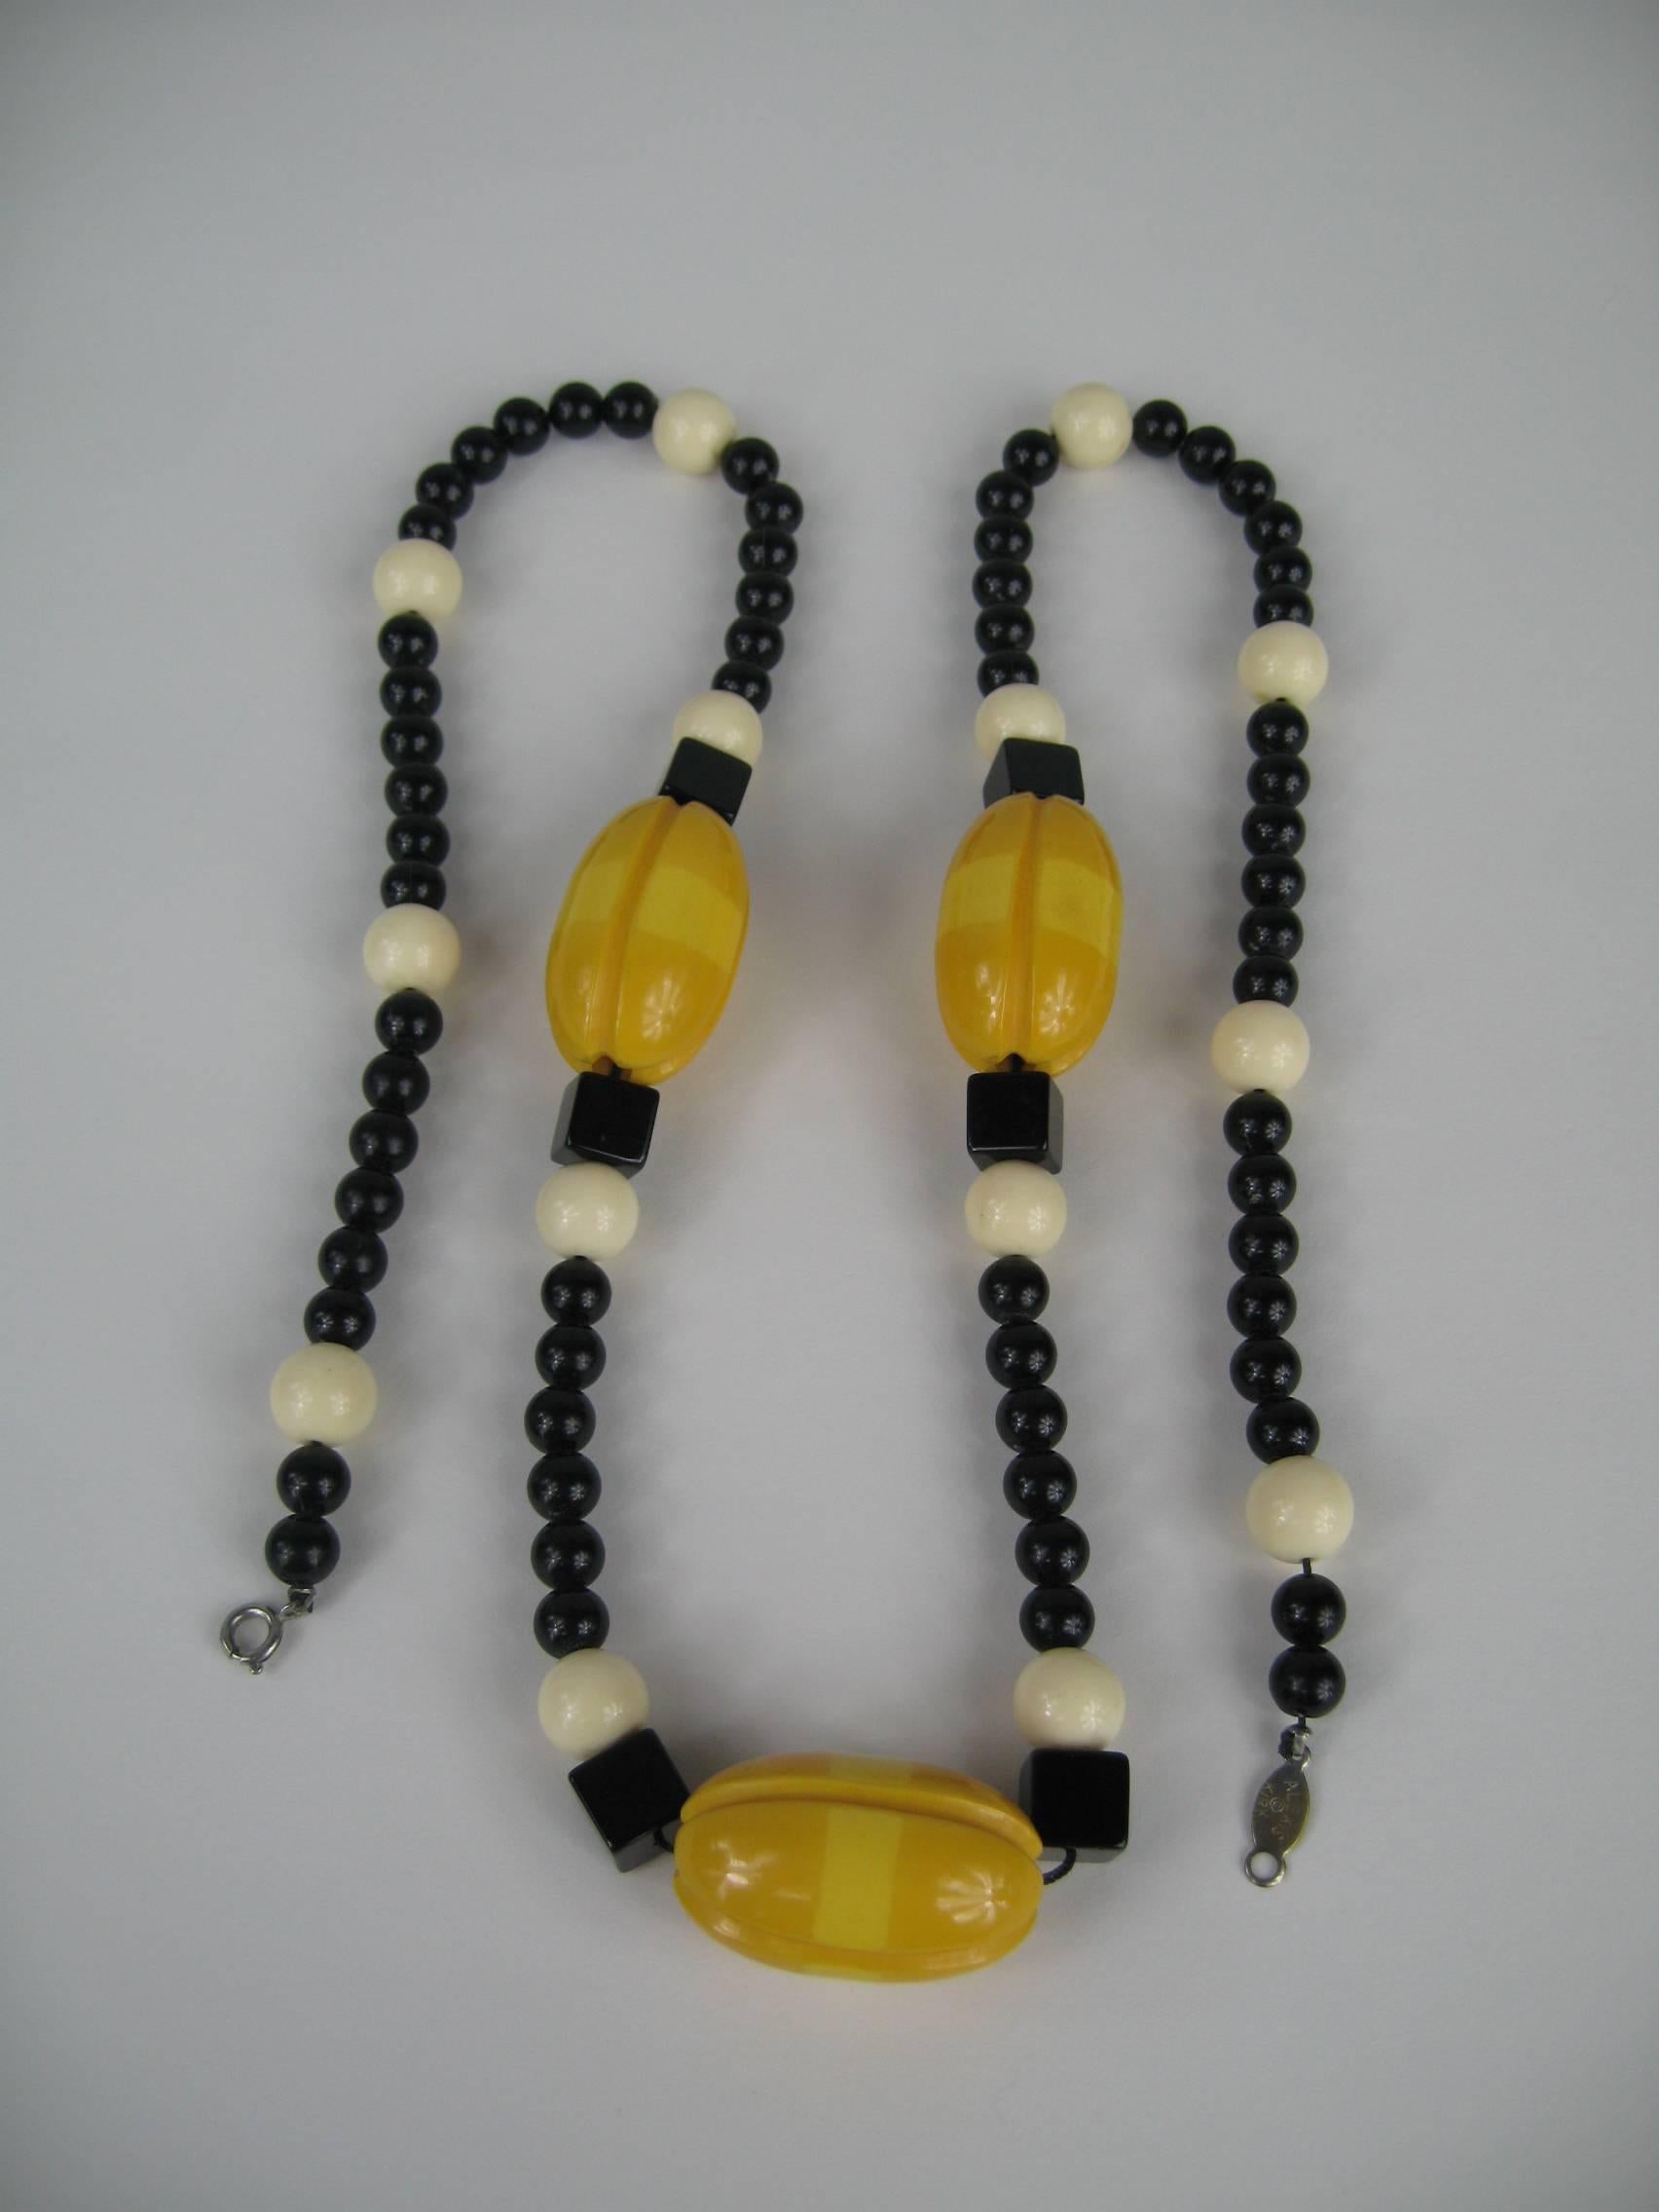 Stunning colors on this vintage Bakelite Necklace. Amber colored Bakelite with black and cream beading mixed in. Oversized carved Bakelite beading with mixed material beading - measuring 34 inches end to end. 36.05 long x 21.64 Bakelite beads. **